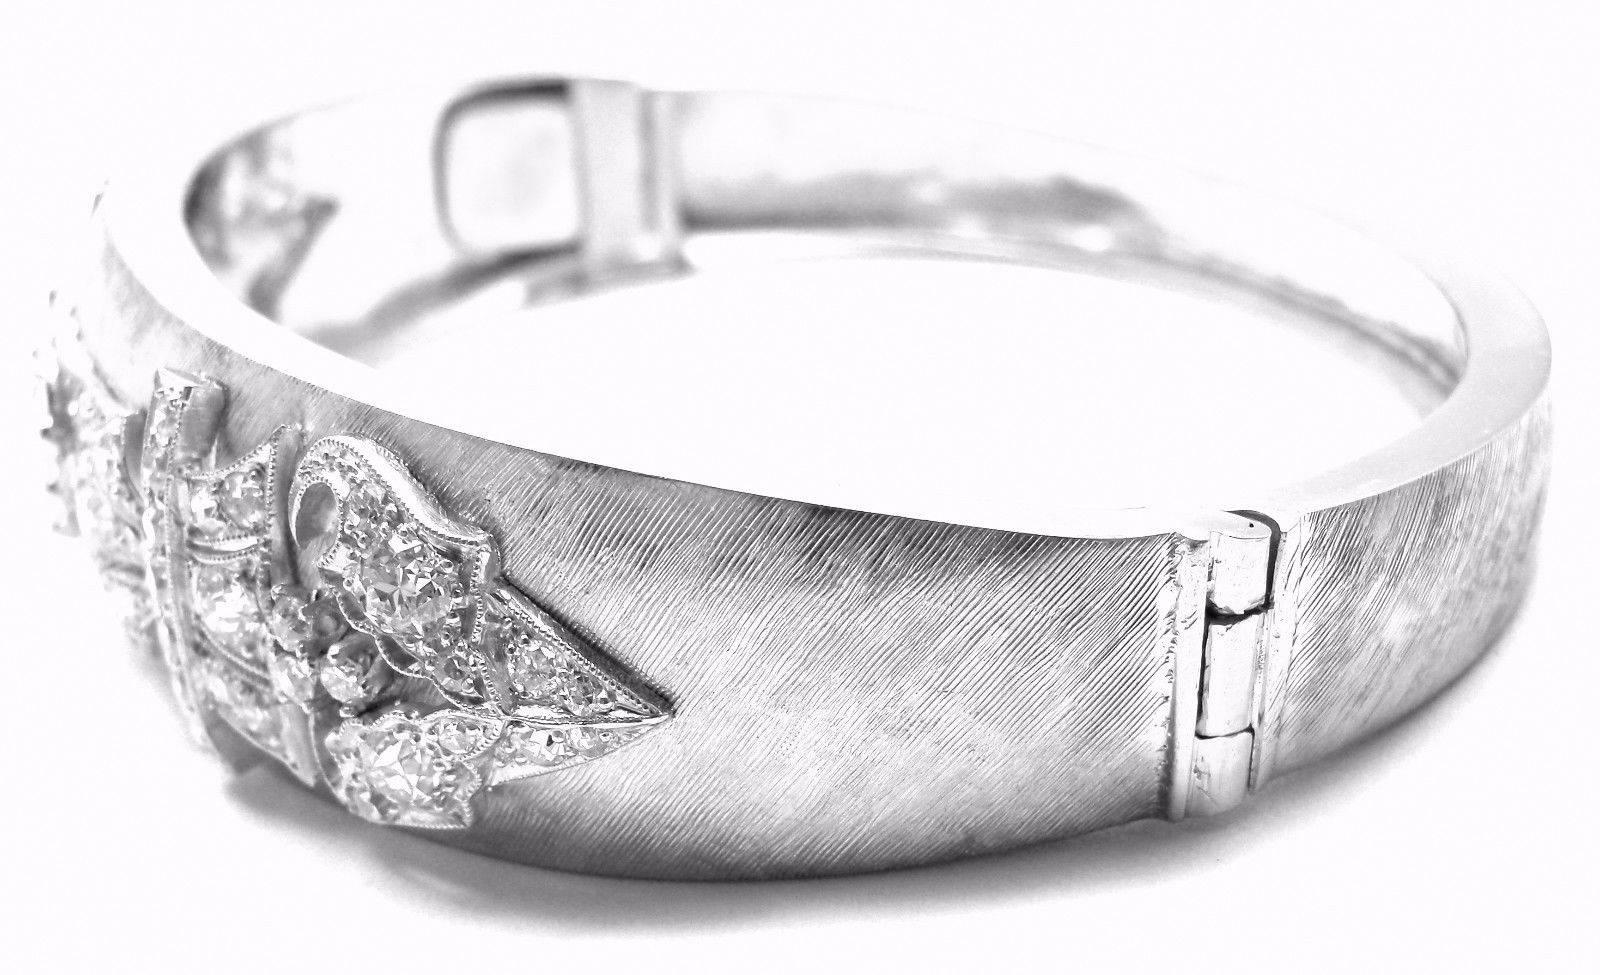 14k White Gold 3ct Diamond Bangle Bracelet.
With 1 round old European cut diamond 
70 round old miner cut diamonds total weight approx. 2ct
Diamonds are H-I color VS1 - VS2 clarity

Measurements:
Length: 7 3/4"
Width: 17mm
Weight: 34.8